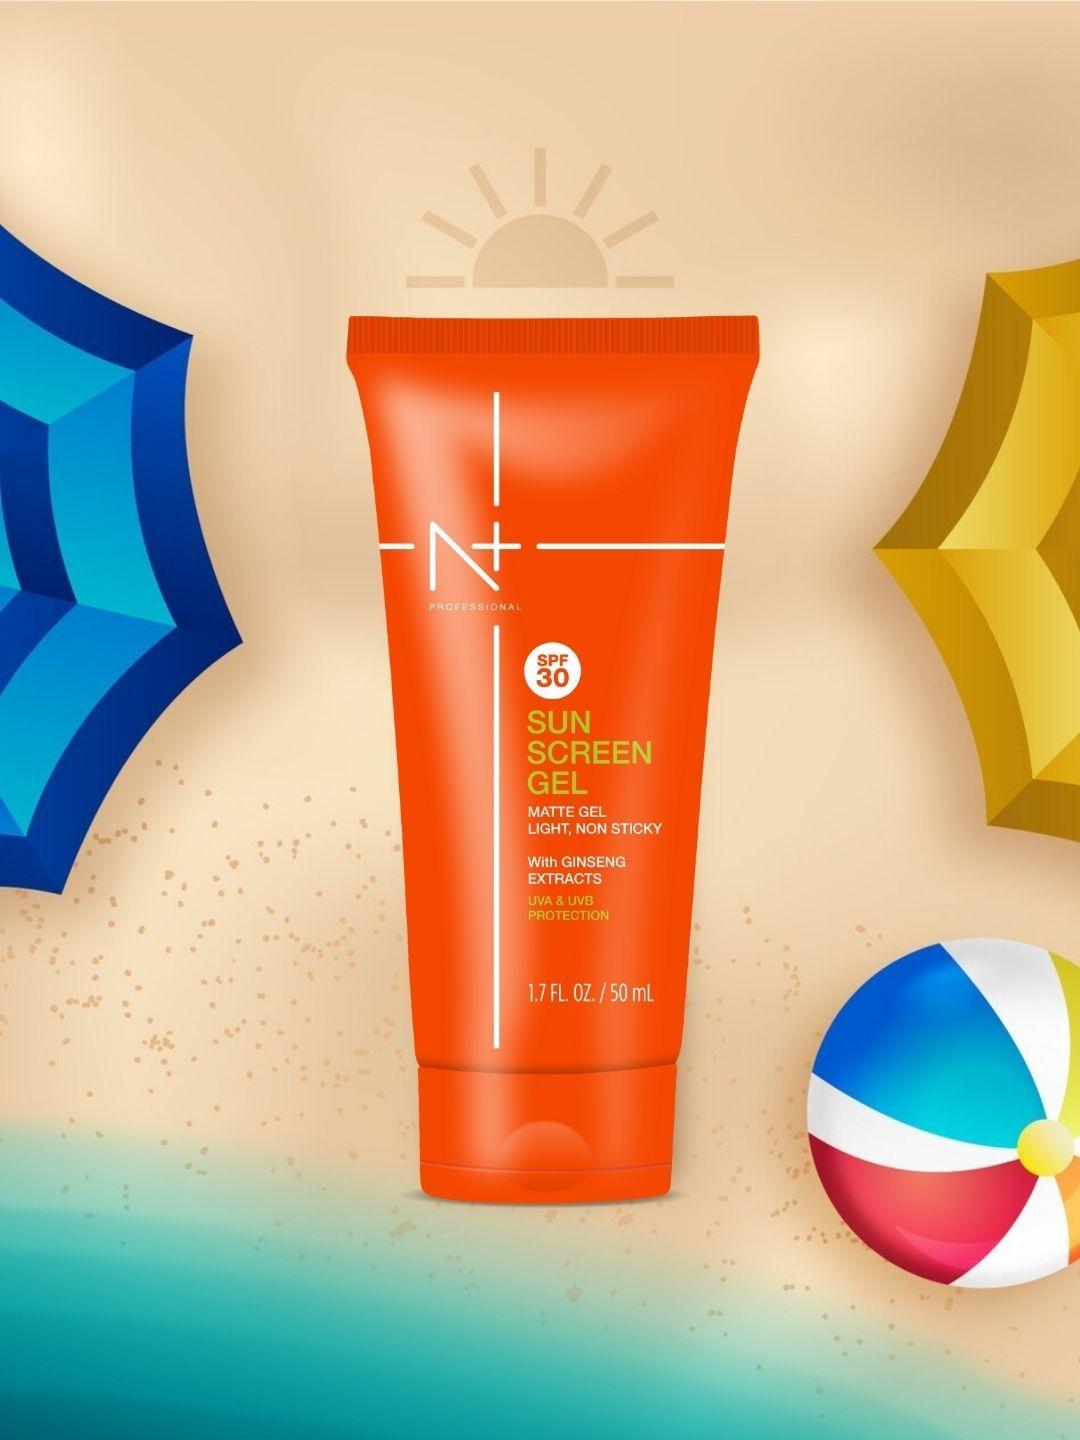 n plus professional spf 30 matte sunscreen gel with ginseng extracts - 100 ml